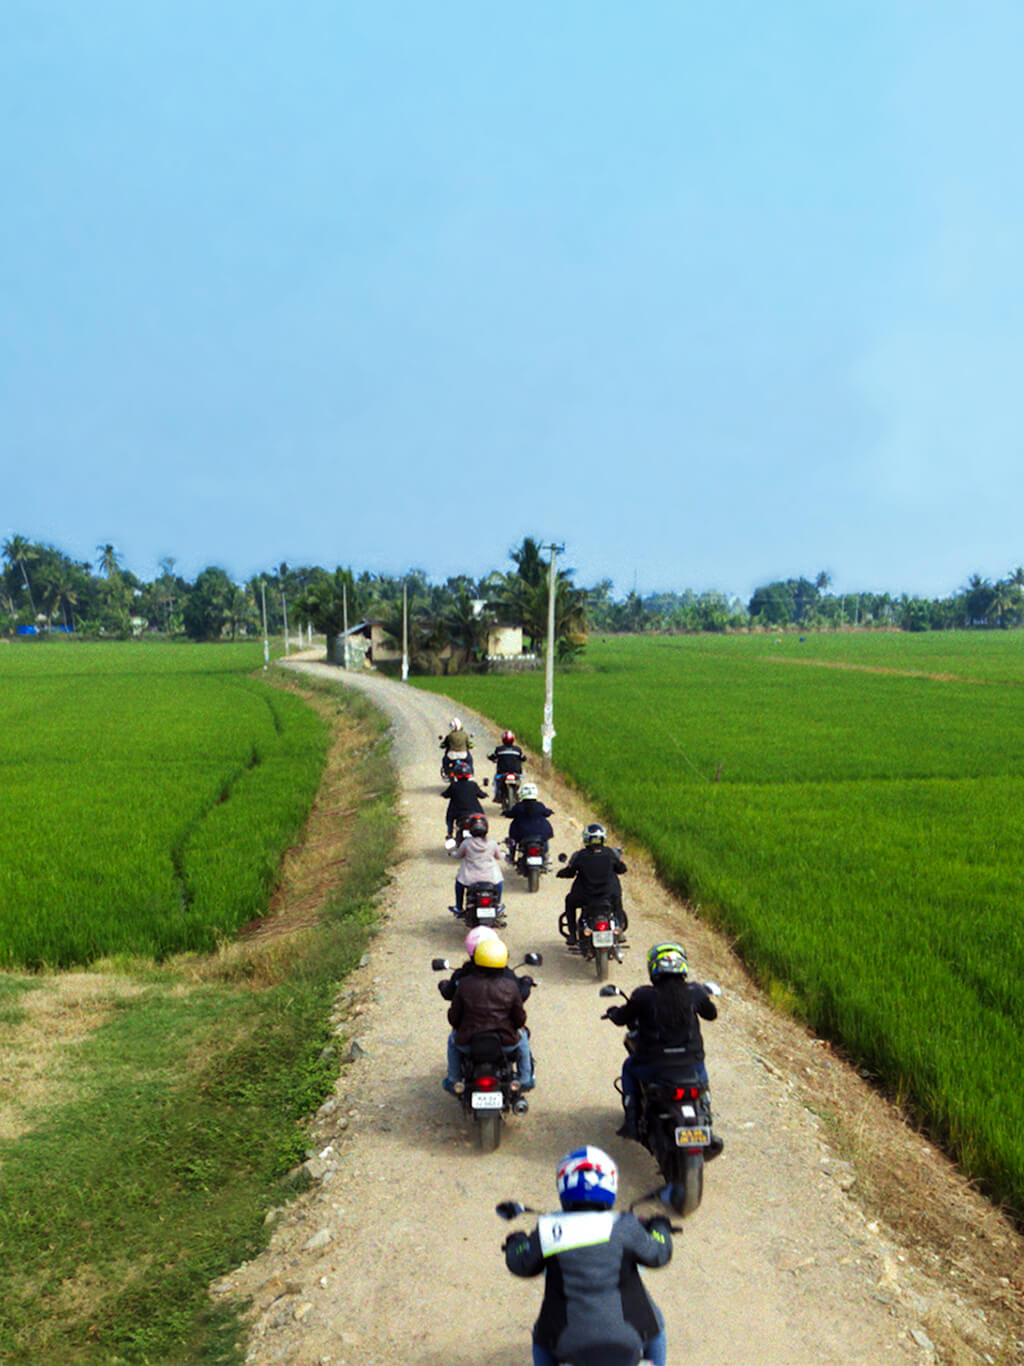 Motorbikes driving down road with green fields either side and blue sky in the background